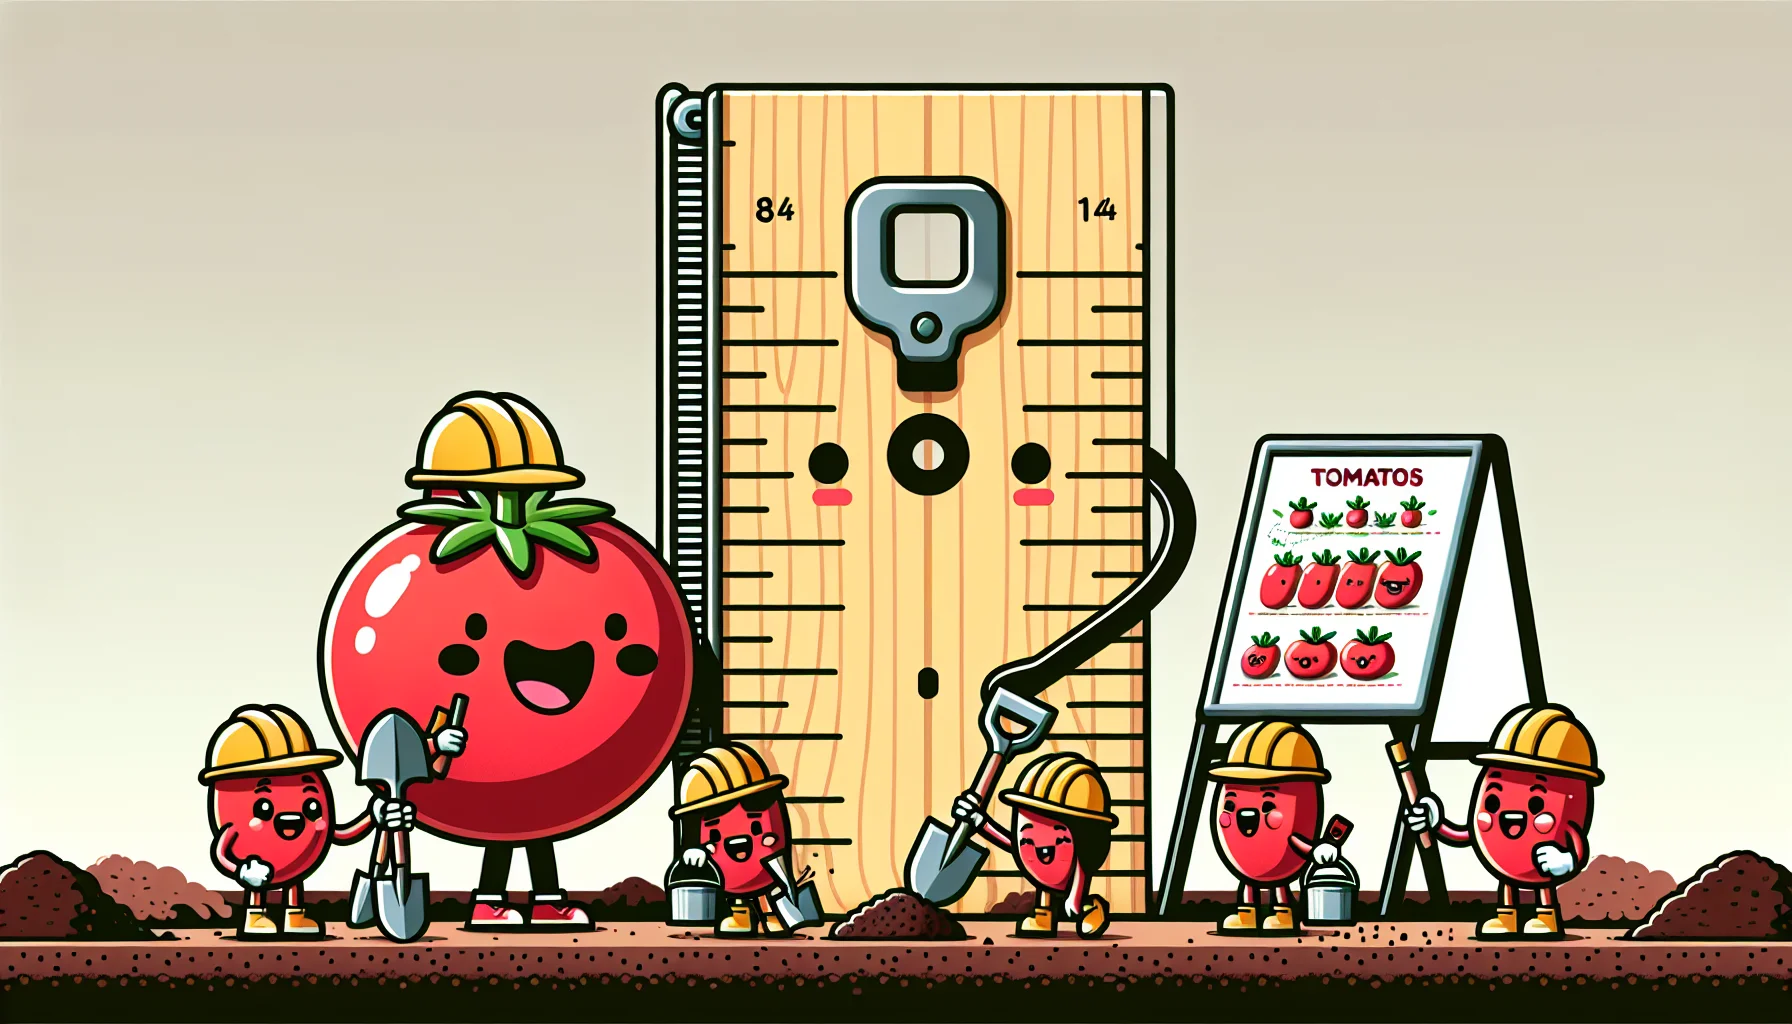 Generate a fun, lighthearted image of a small to medium-sized garden. The center of the scene is dominated by a tall tape measure, acting like a mighty totem, next to which are cute, smiling tomato seeds armed with little shovels and hard hats, ready to dive in. A whiteboard that stands nearby illustrates a cross-sectional view of soil with a guide showing that tomato seeds should be planted about 1/4 inch deep. Spectating this are human characters of diverse gender and descent, from Hispanic female to South Asian male, laughing and enjoying the quirky gardening scene.